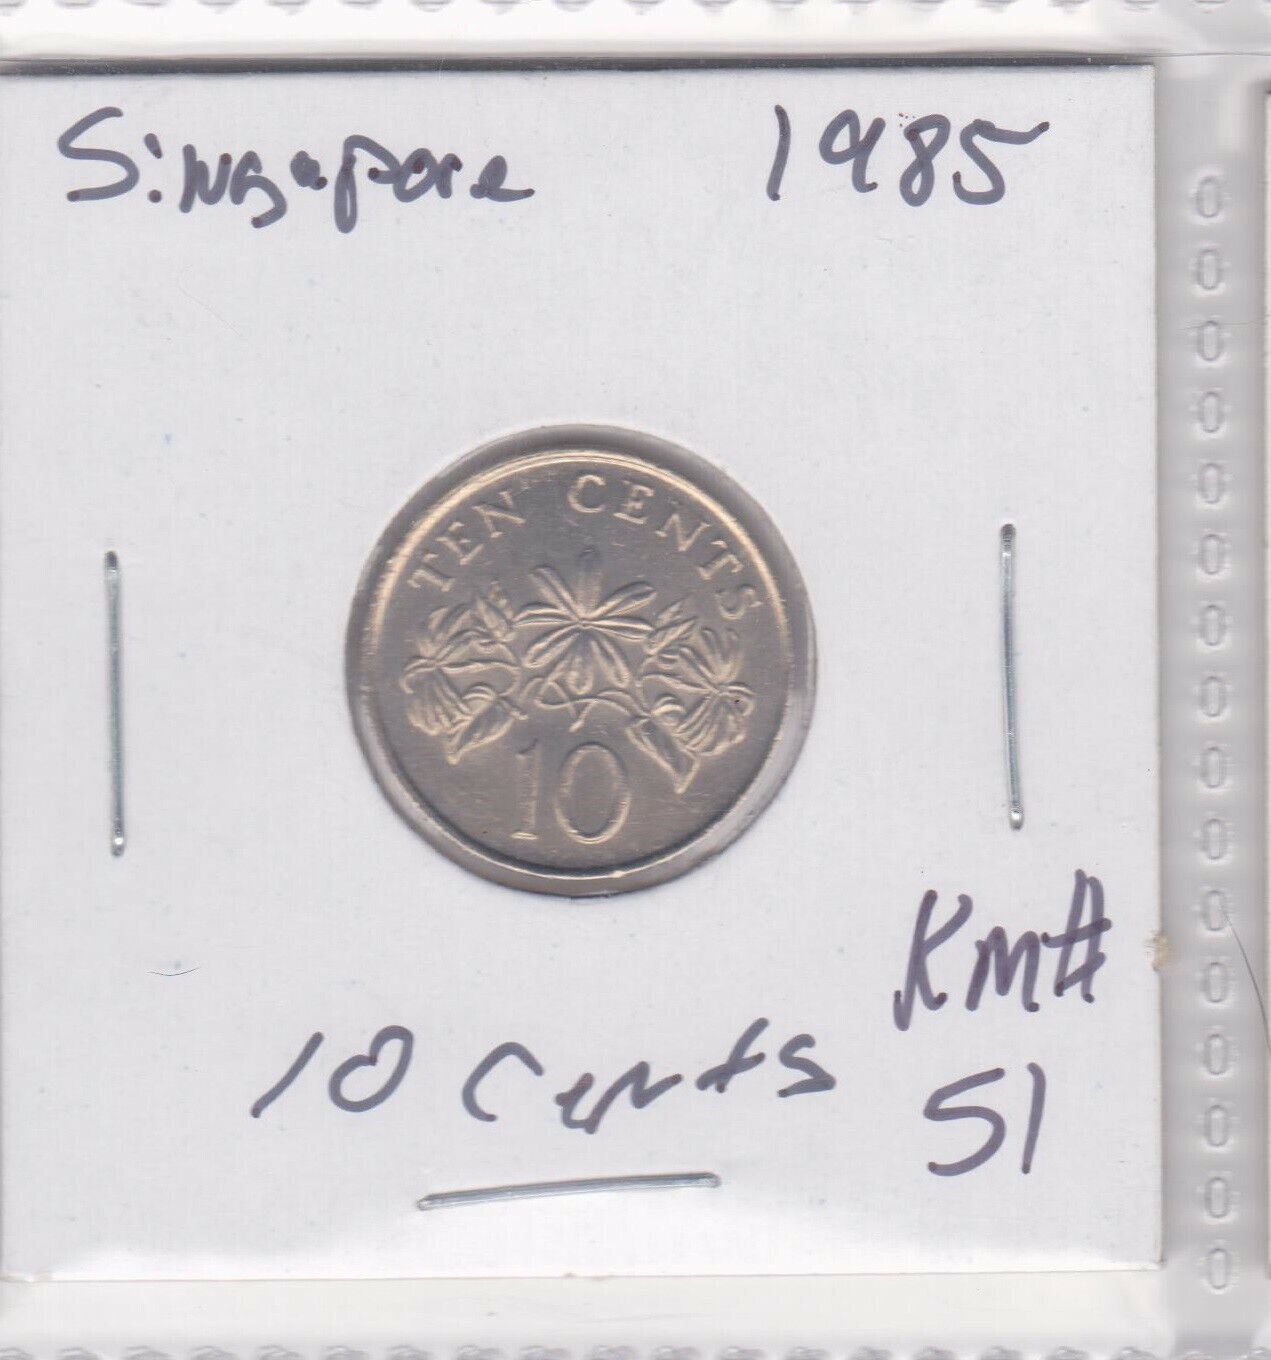 Singapore 1985 10 Cents Coin Km#51